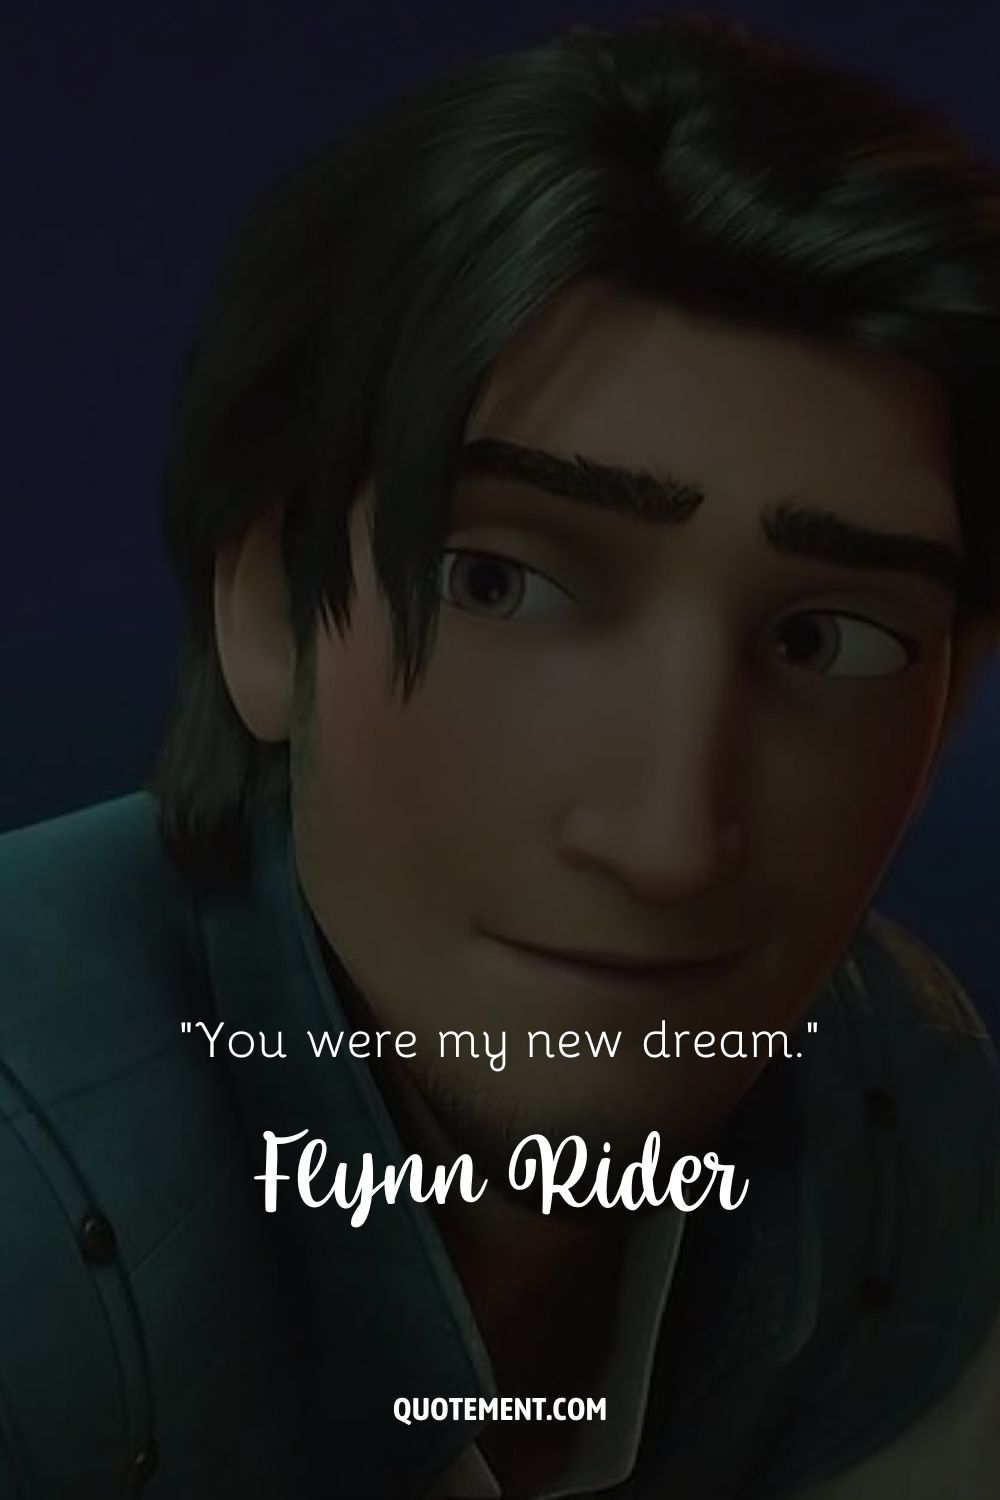 an image of a male cartoon character representing flynn rider smolder quote